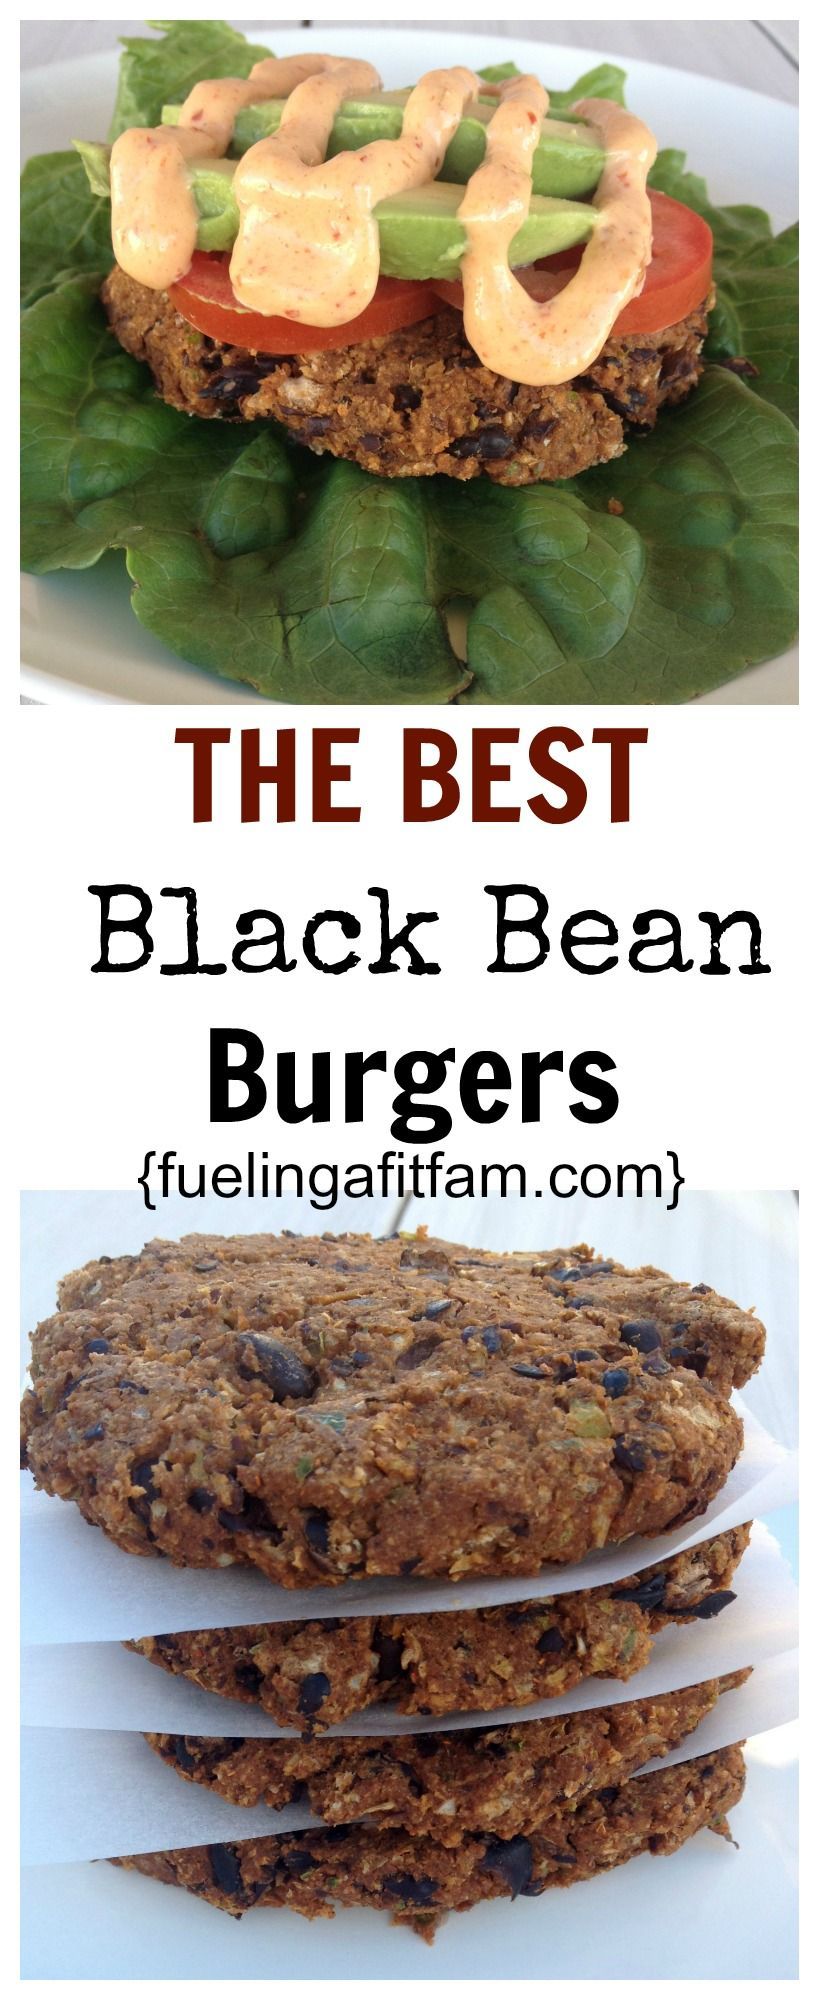 These are THE BEST Black Bean Burgers I have ever had! Easy, healthy and so delicious!